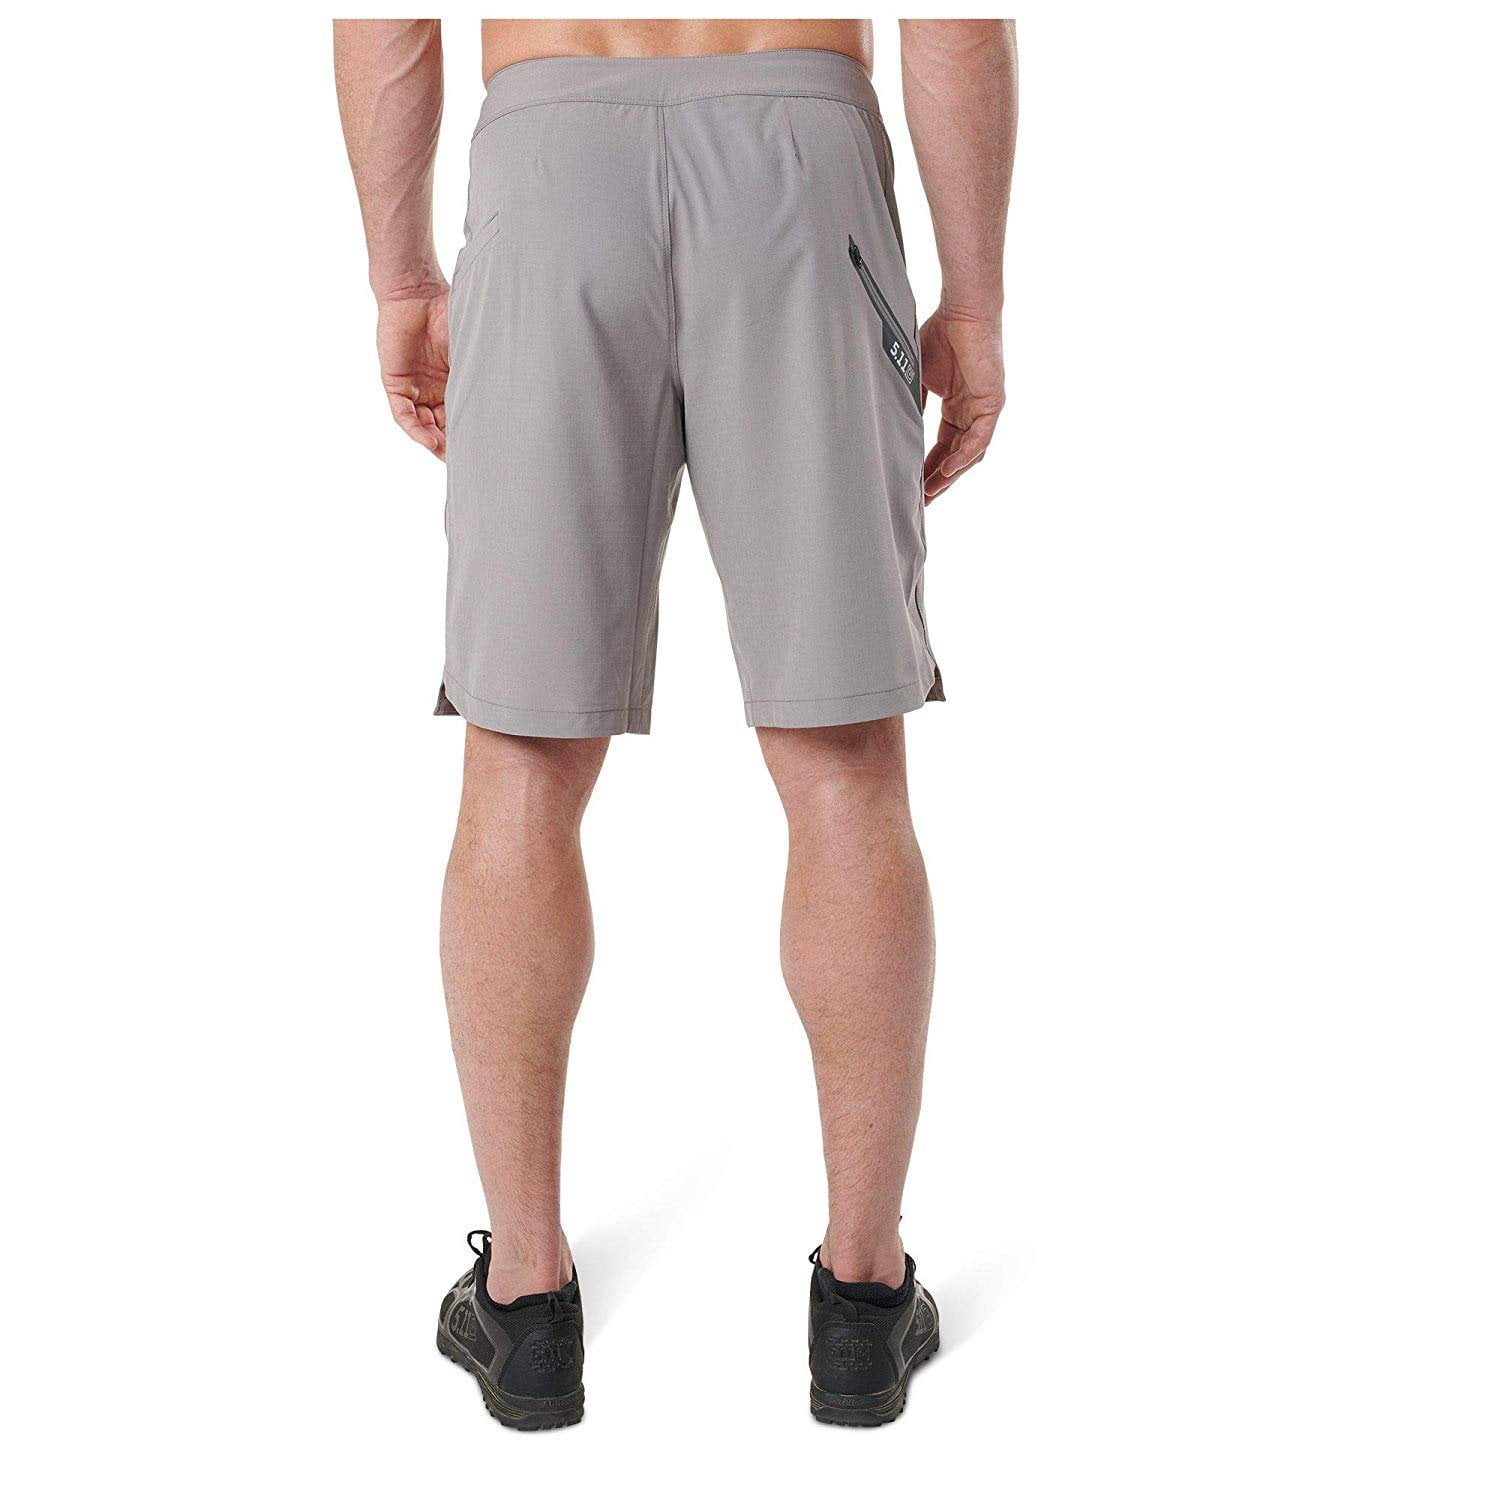 Stretch Fabric 5.11 Tactical Mens Vandal Shorts 11-Inch Inseam Style 73340 Board Shorts 